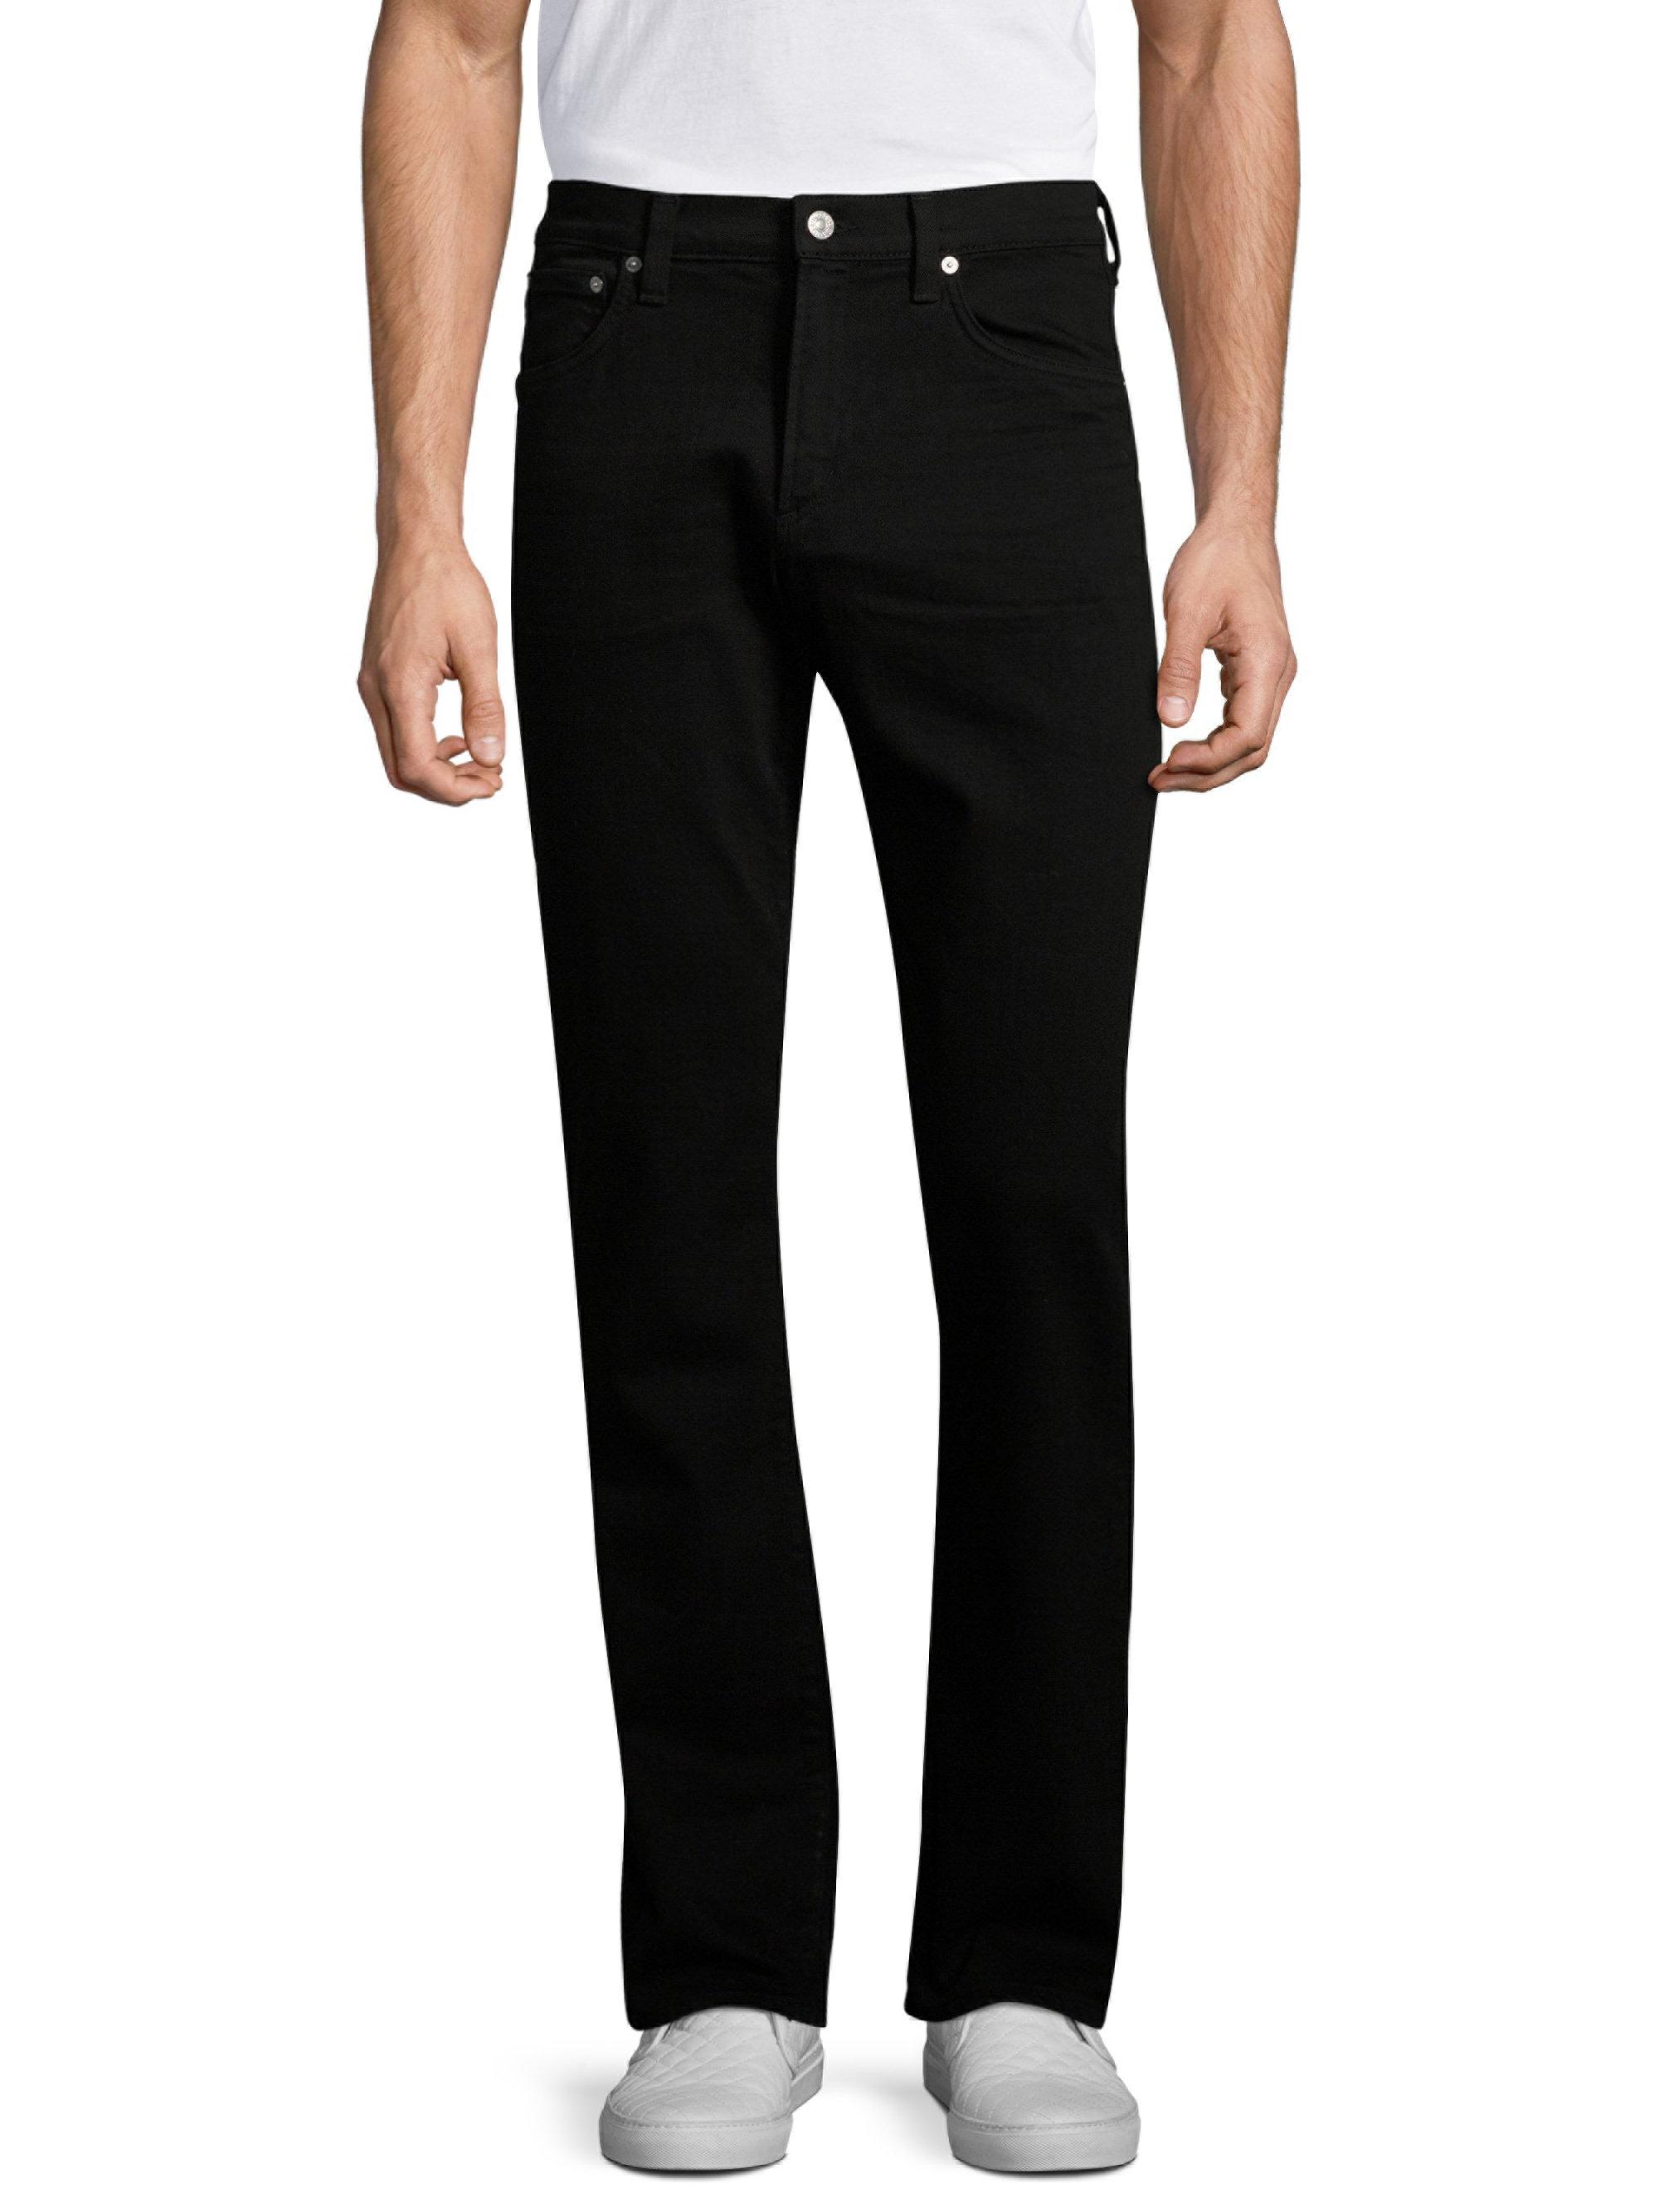 Lyst - Citizens Of Humanity Sid Class Straight-fit Jeans in Black for Men